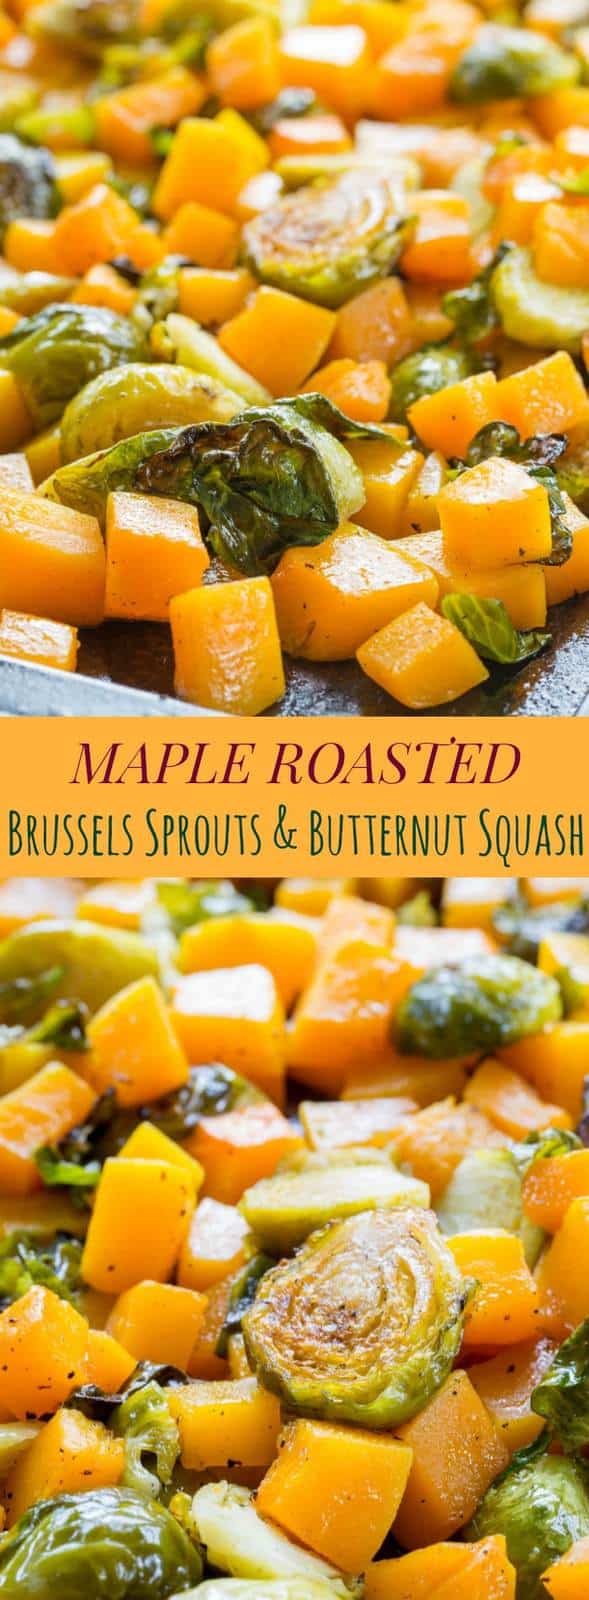 Maple Roasted Brussels Sprouts and Butternut Squash - Cupcakes & Kale Chips